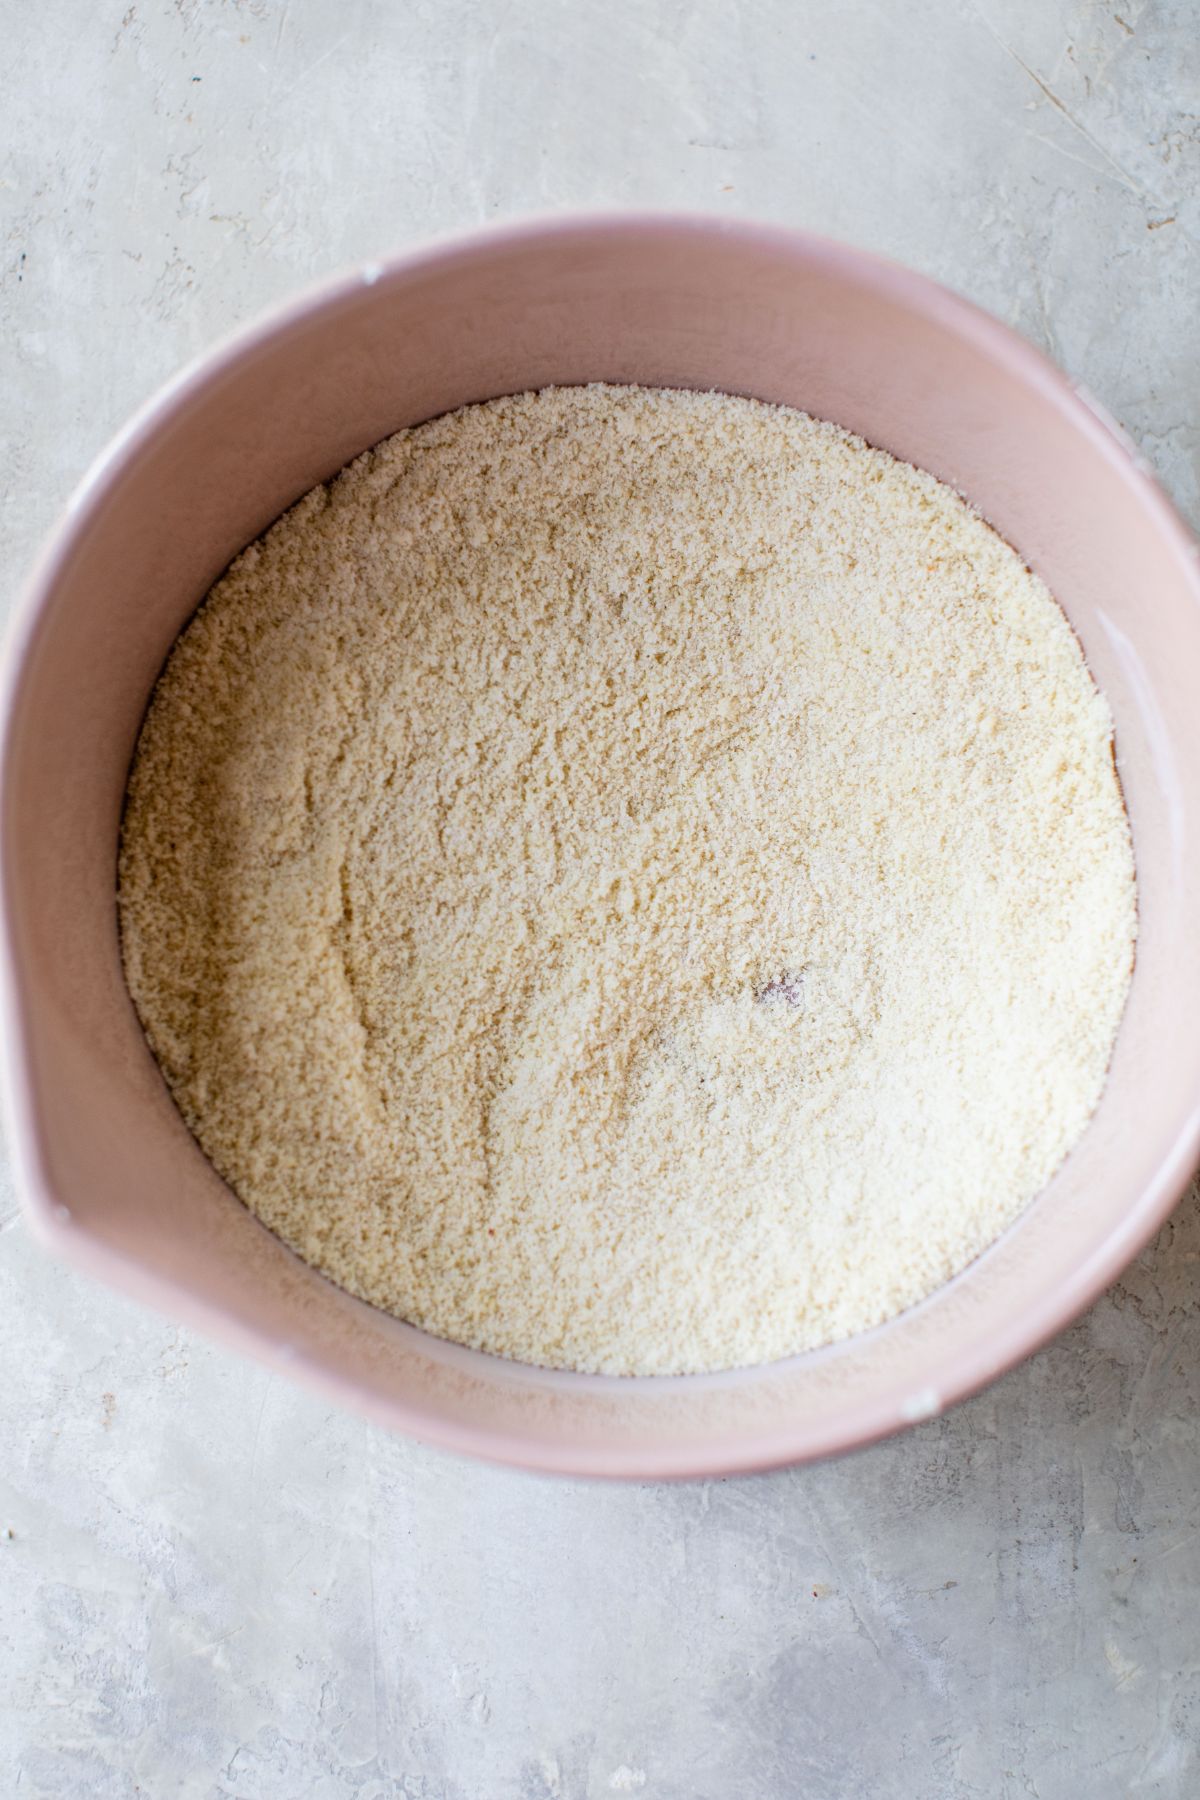 Combining almond flour with other dry ingredients in a large bowl.